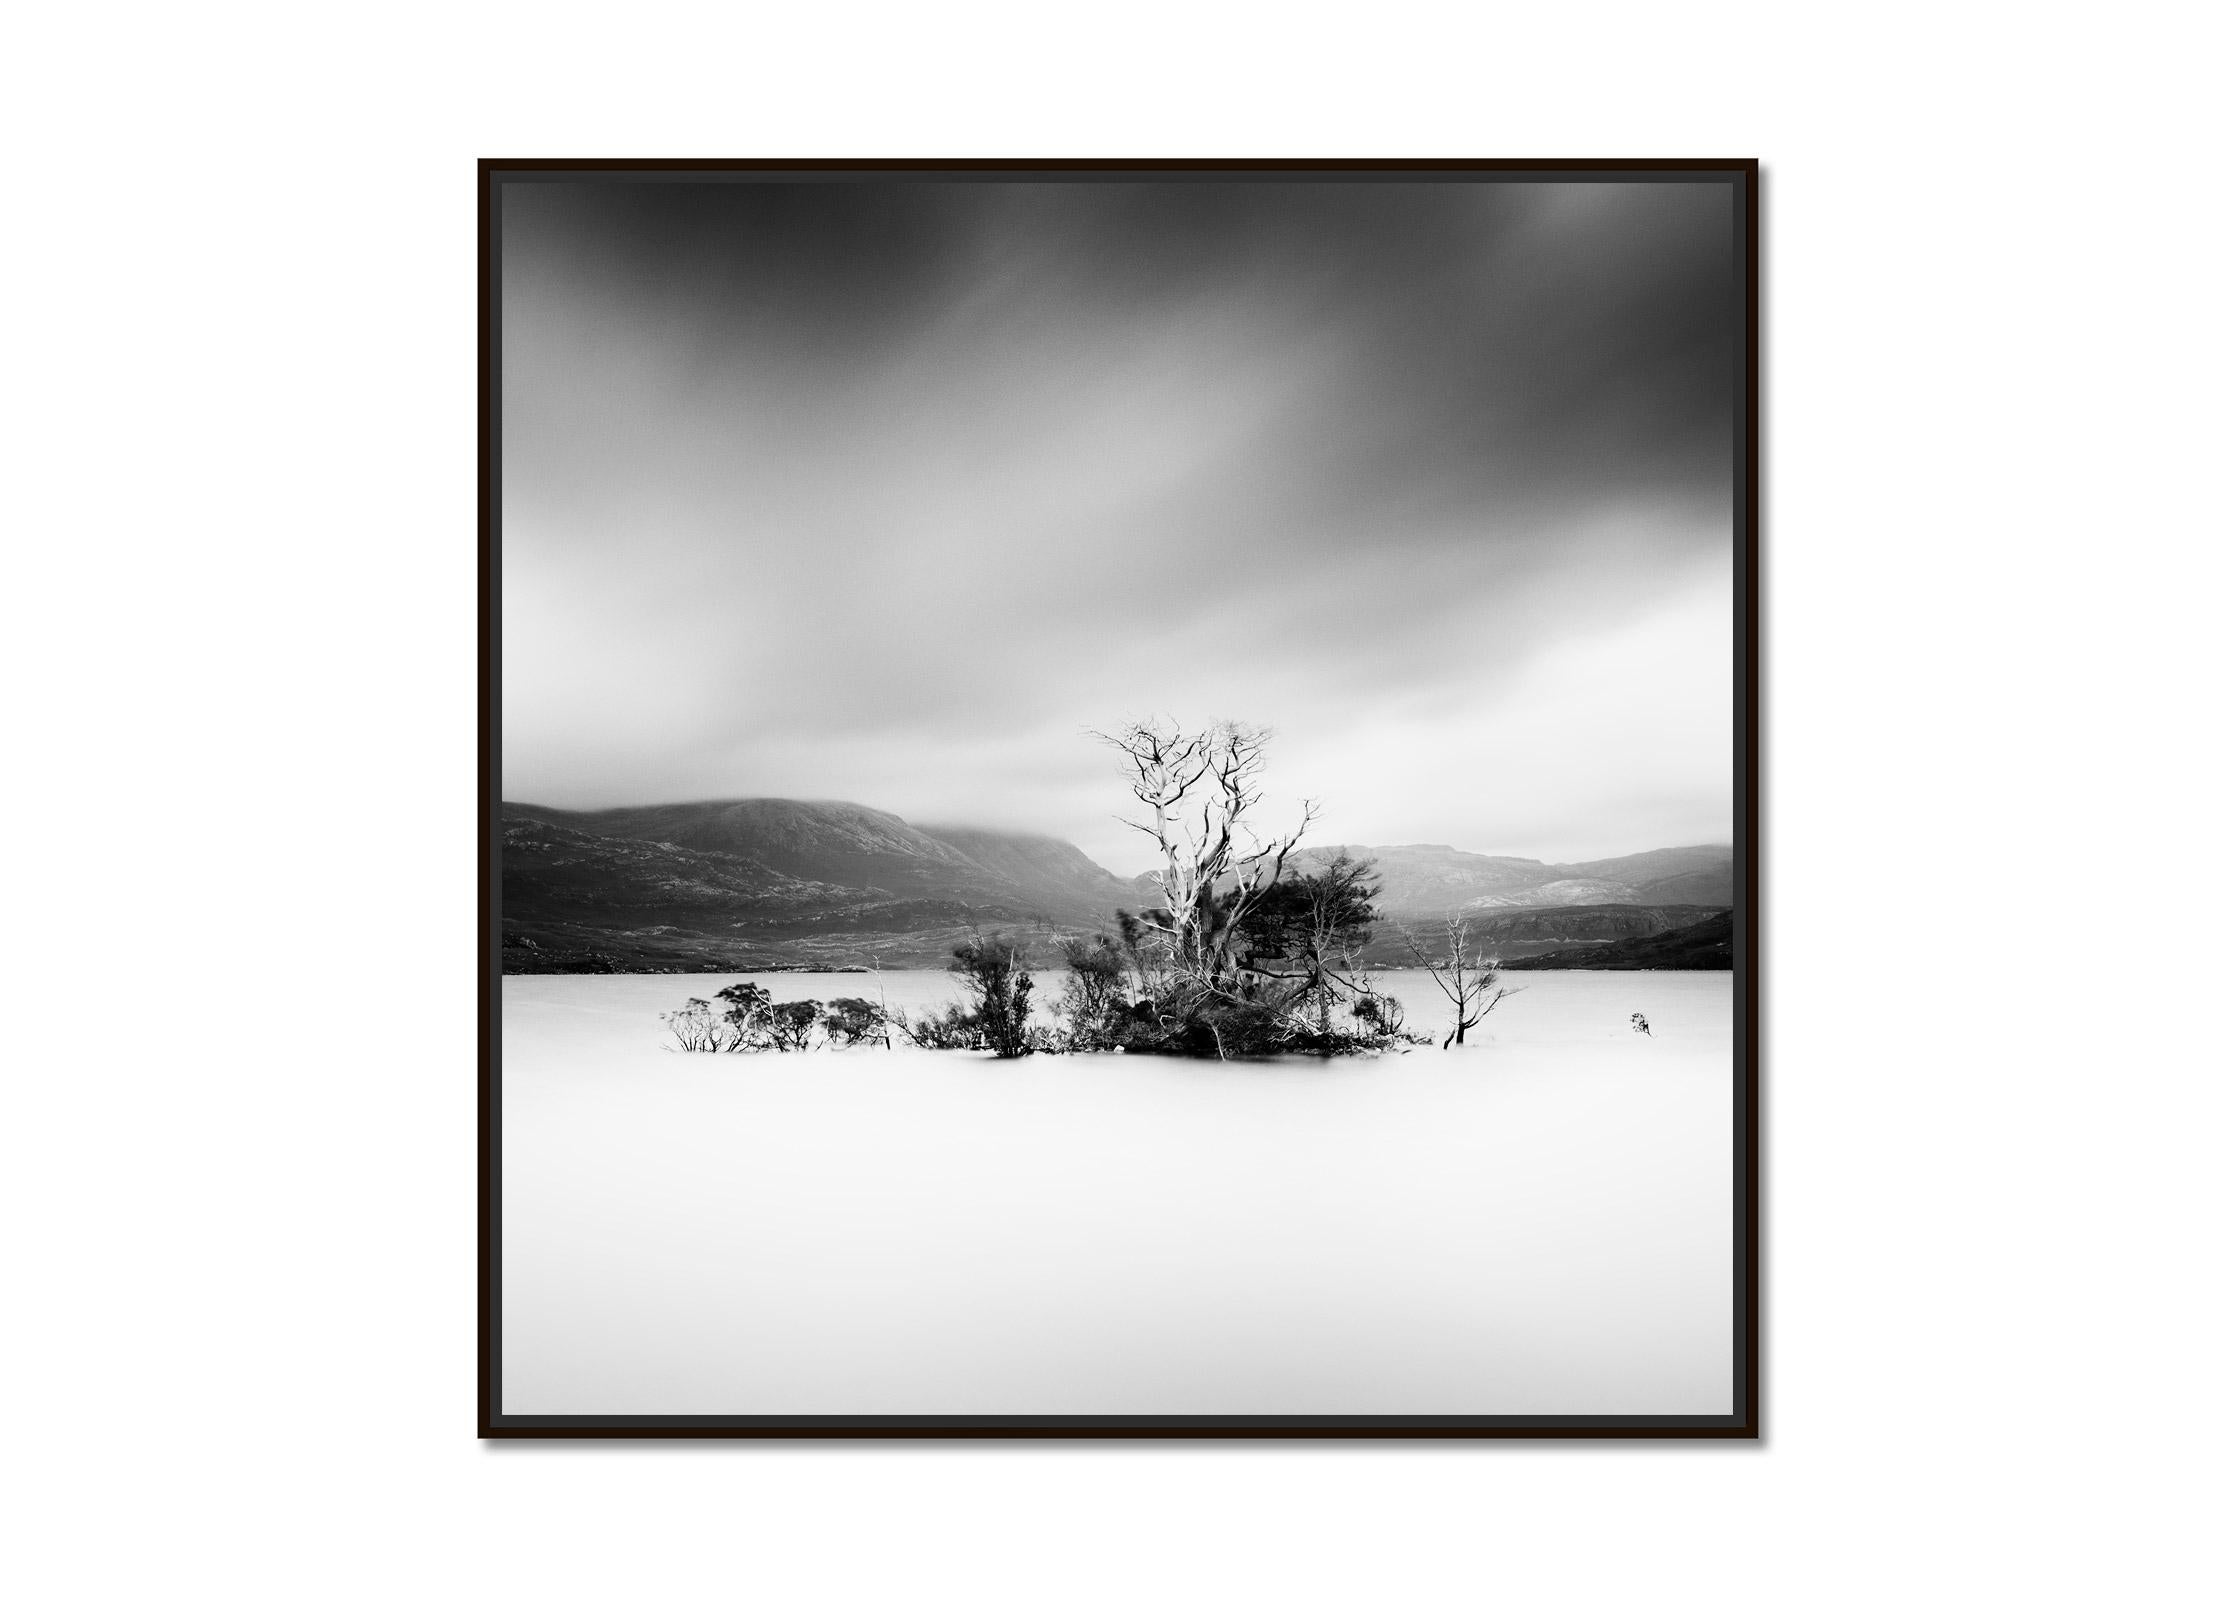 Drowned Island, sunken trees, Scotland, black & white long exposure photography  - Photograph by Gerald Berghammer